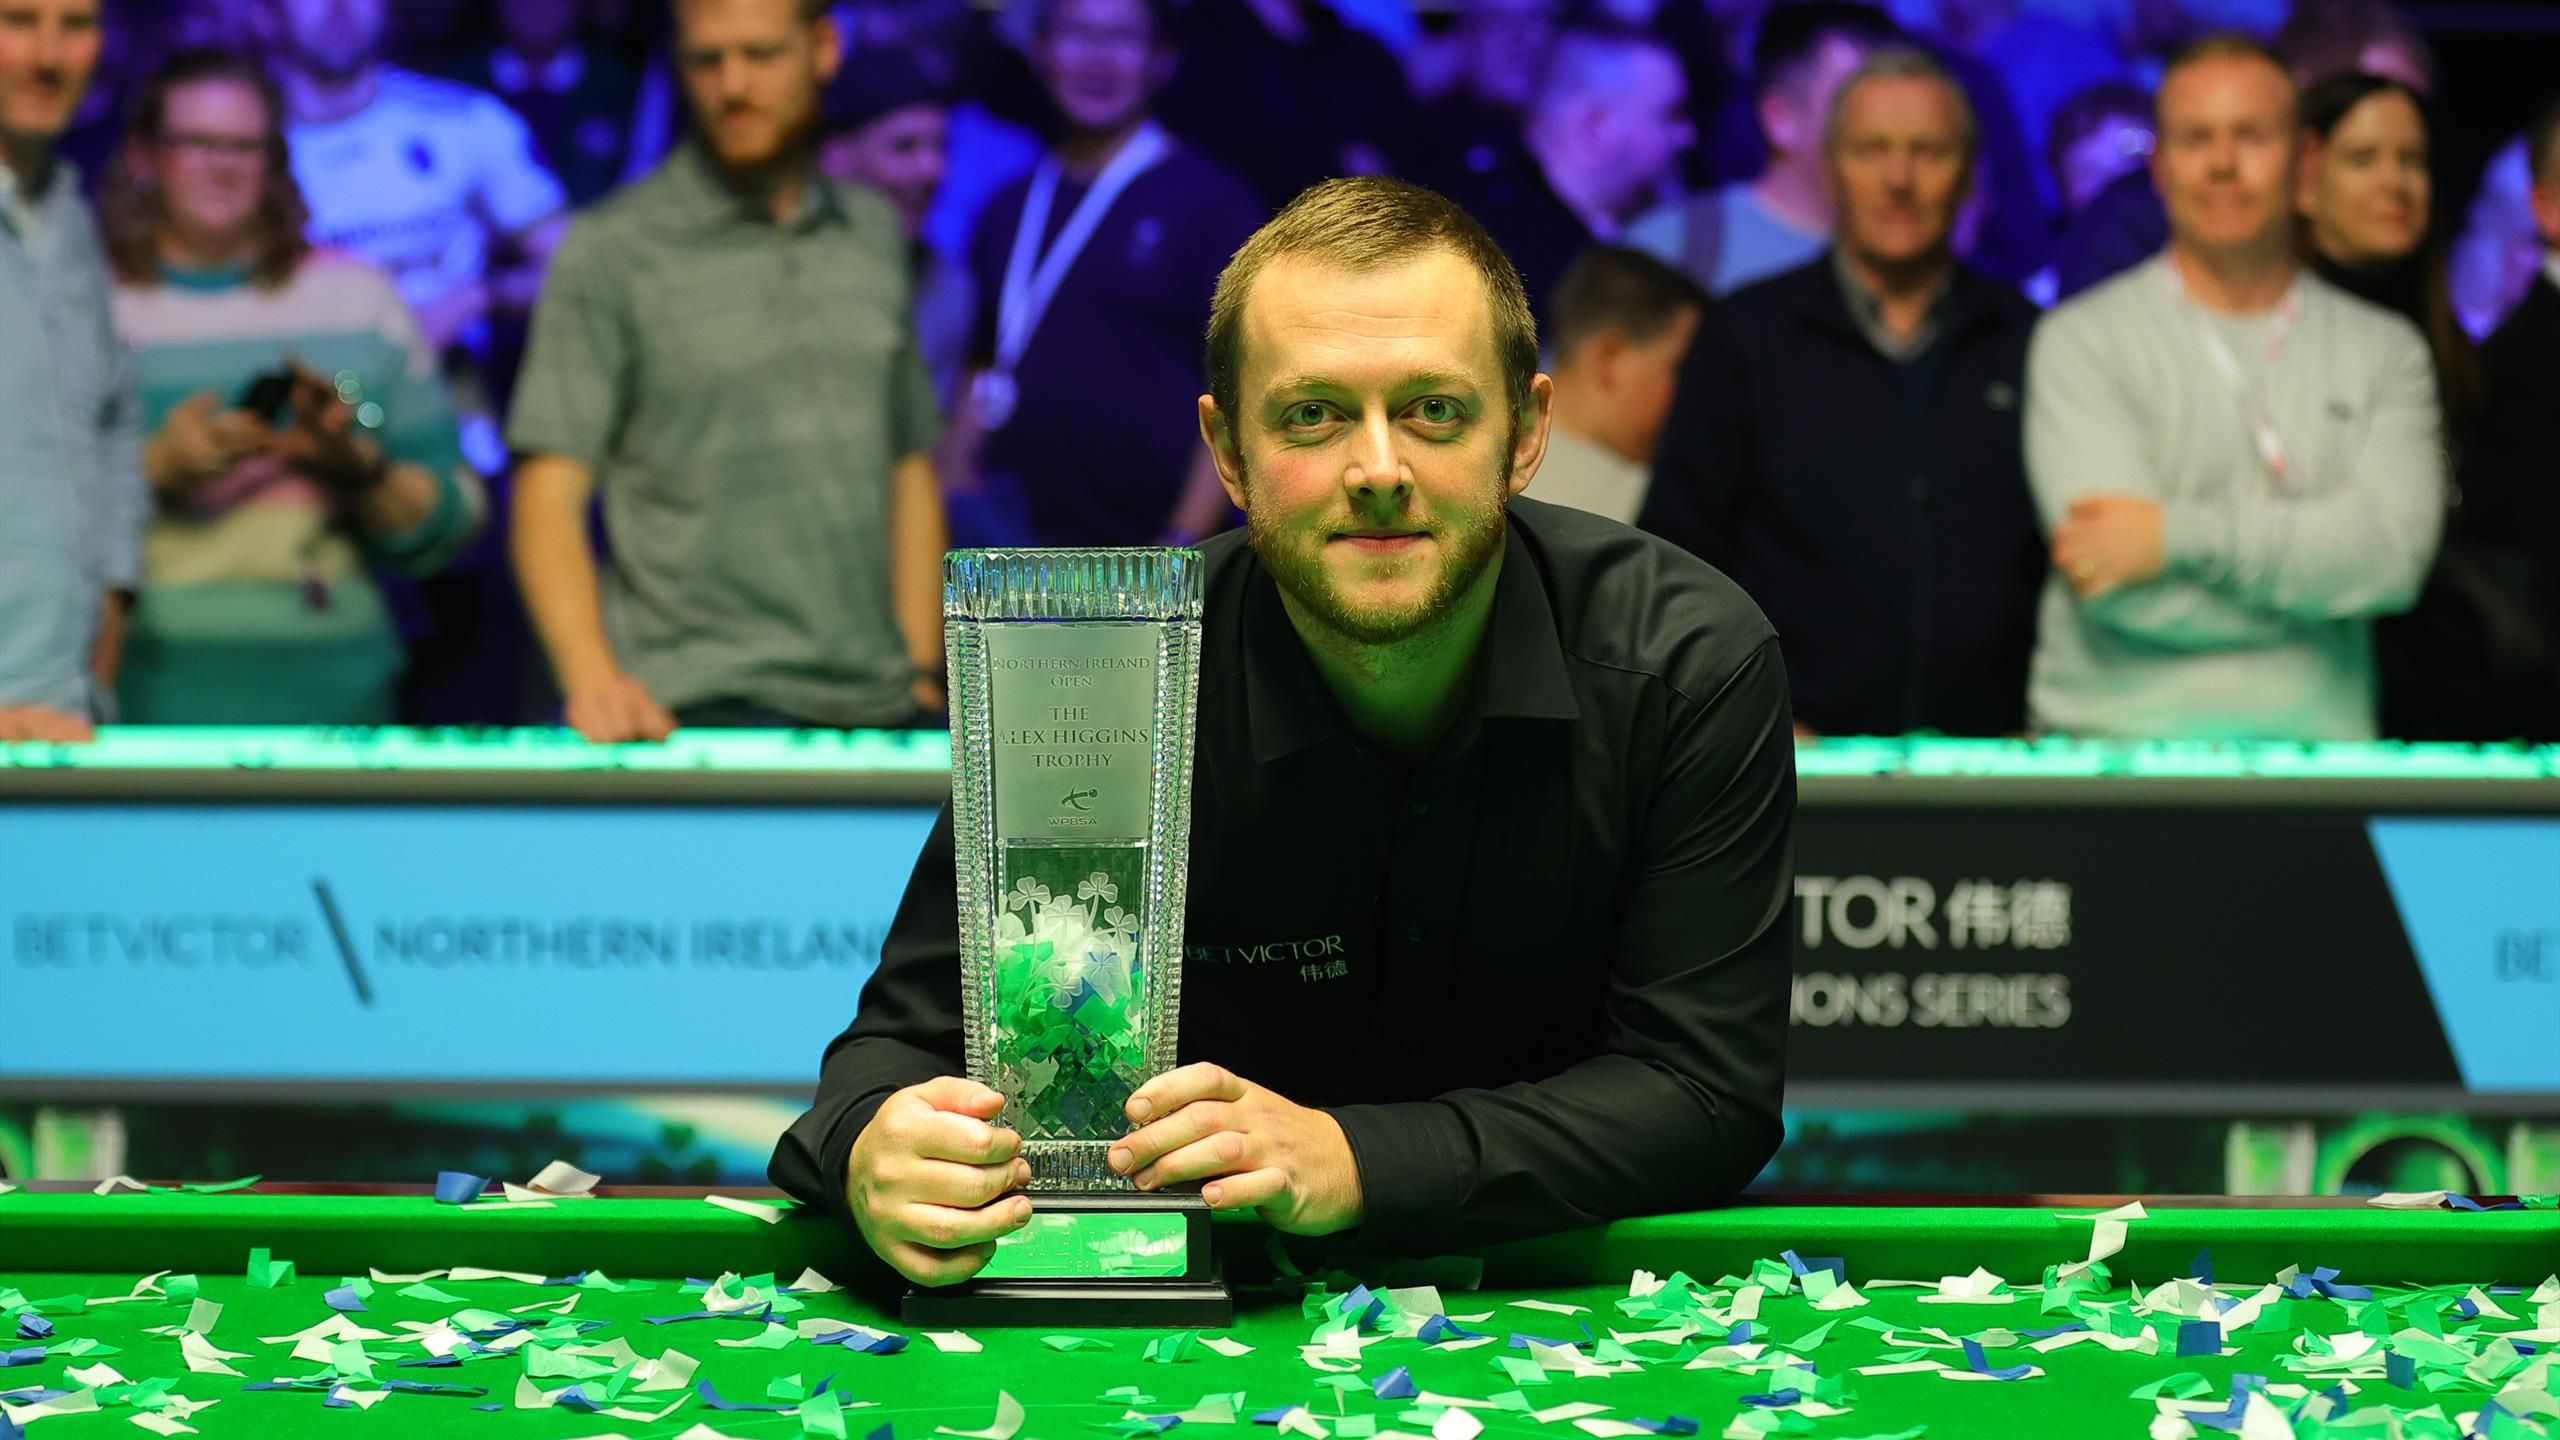 Mark Allen ready to celebrate special Northern Ireland Open win - I wonder how many Jagerbombs you can fit in this?